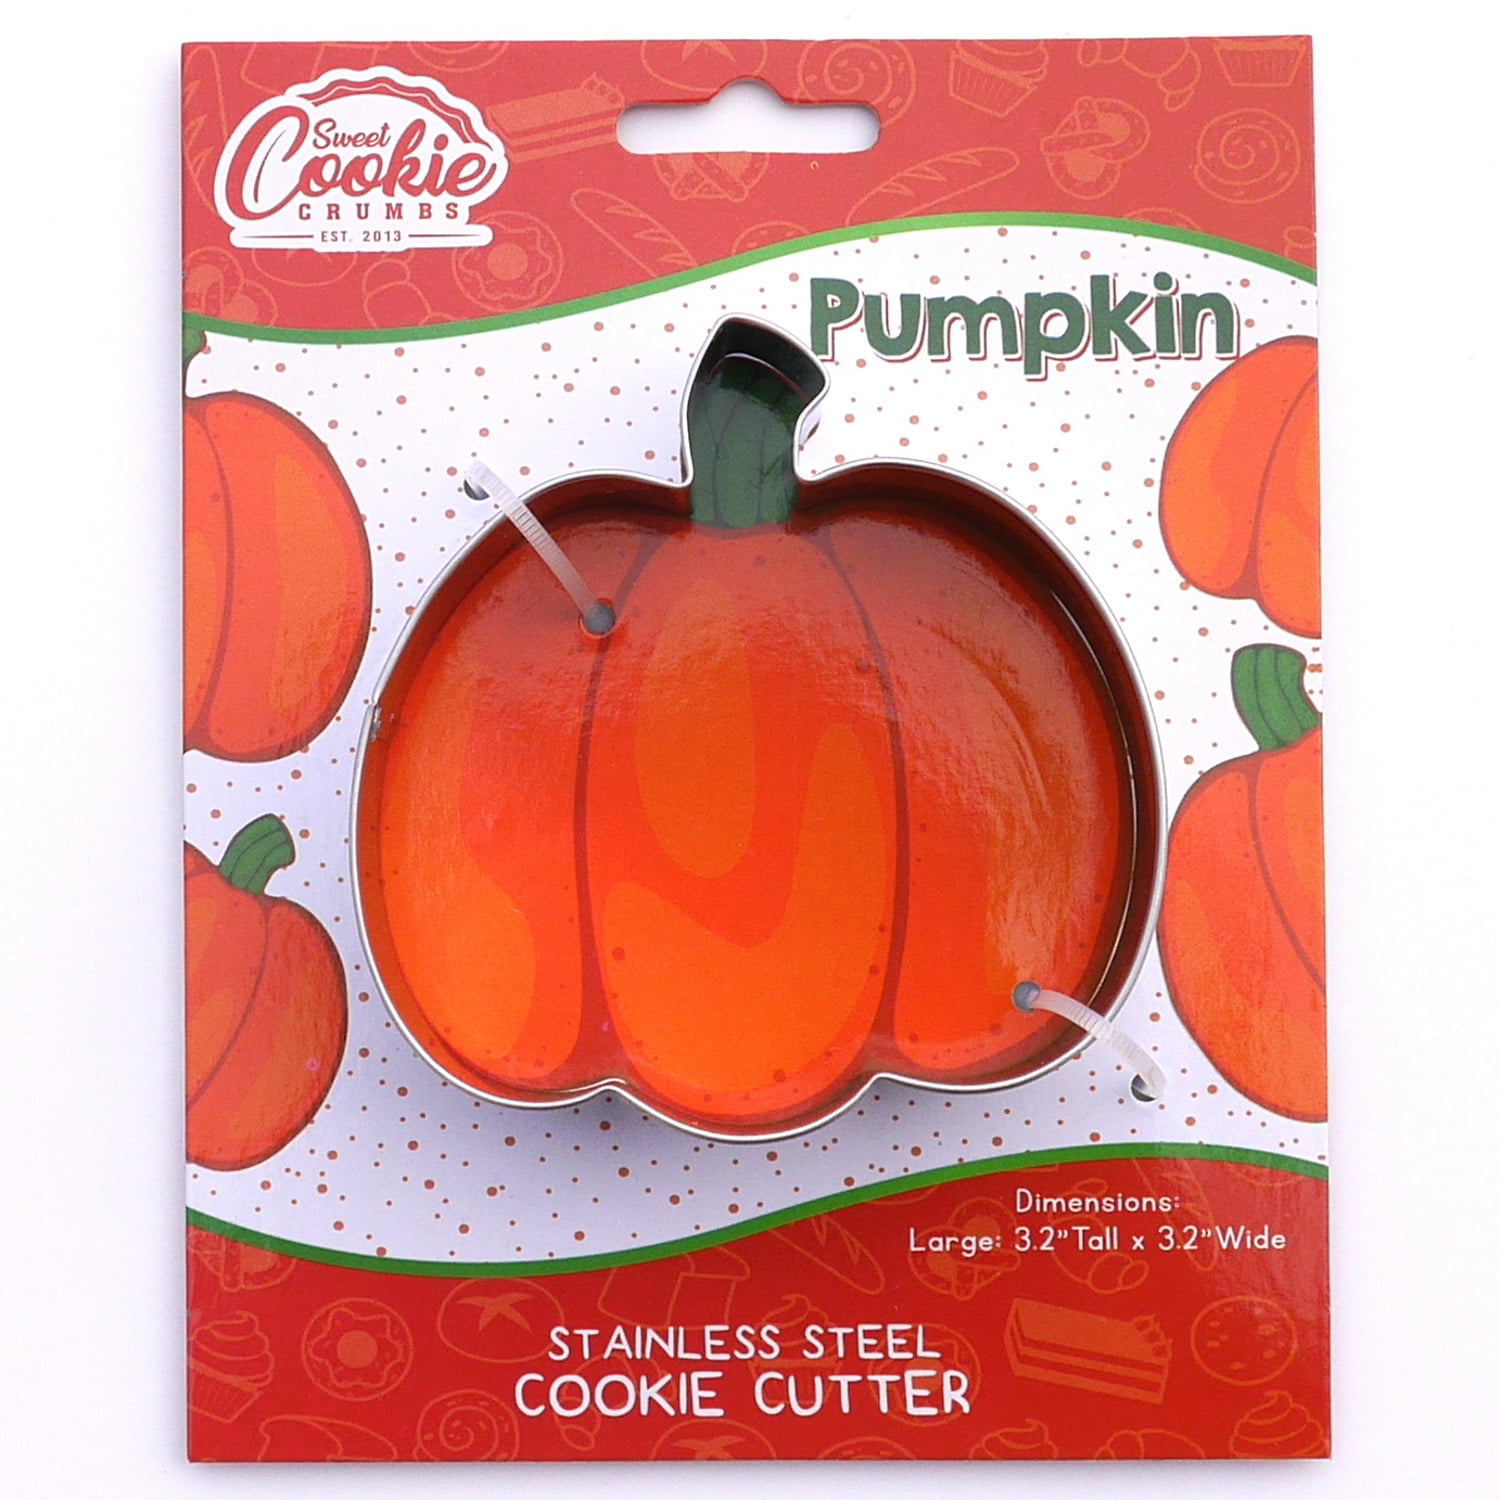 Stainless Steel DeColorDulce Pumpkin Cookie Cutter 13 x 10 x 3 cm Silver 